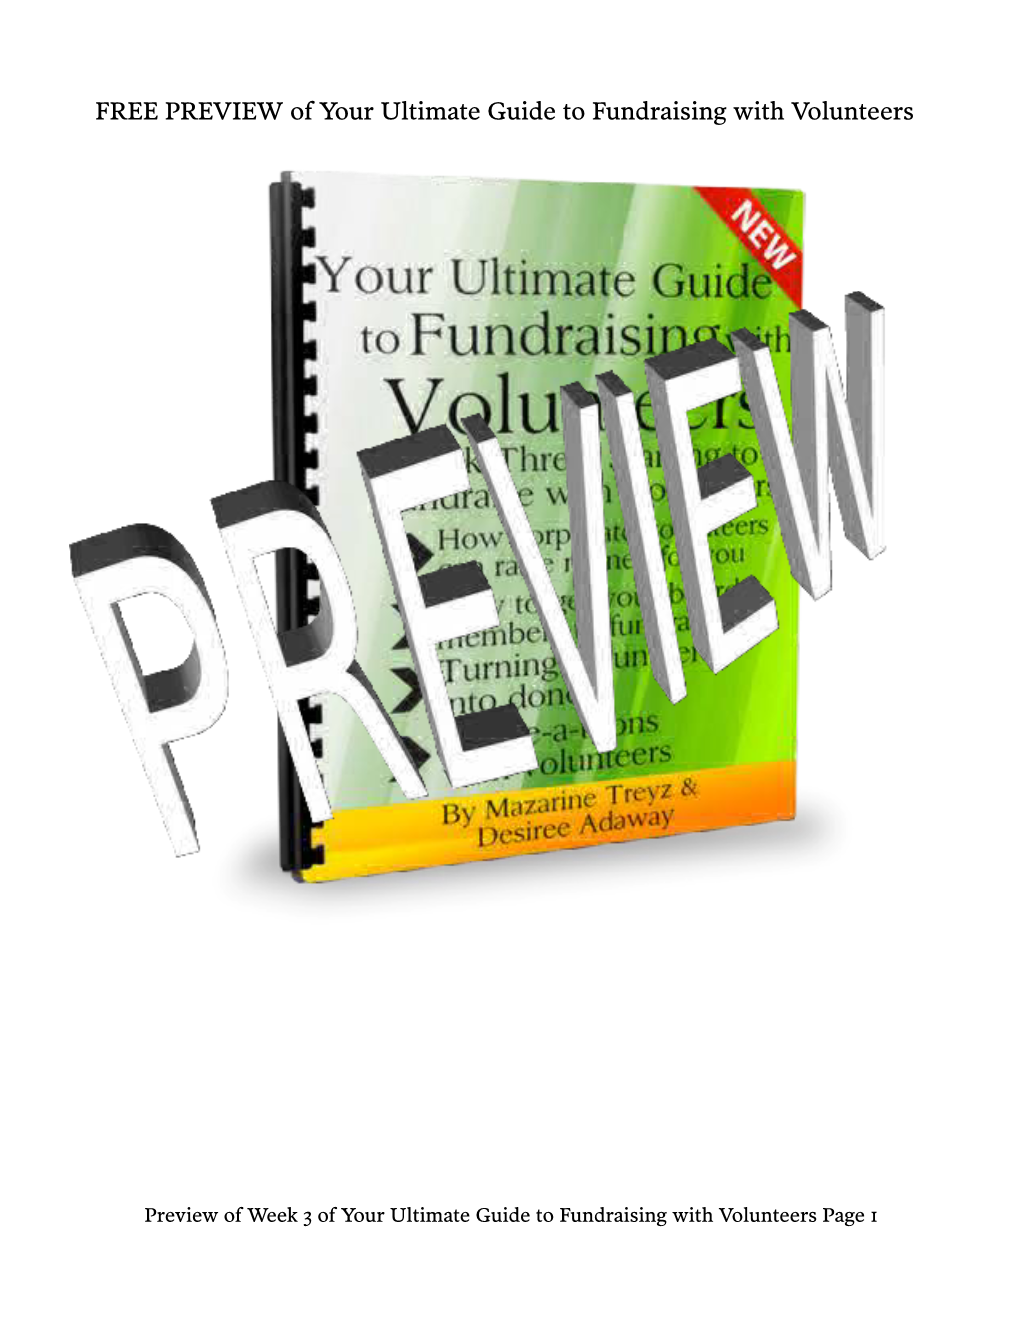 Want to See a Sample of Your Ultimate Guide to Fundraising With